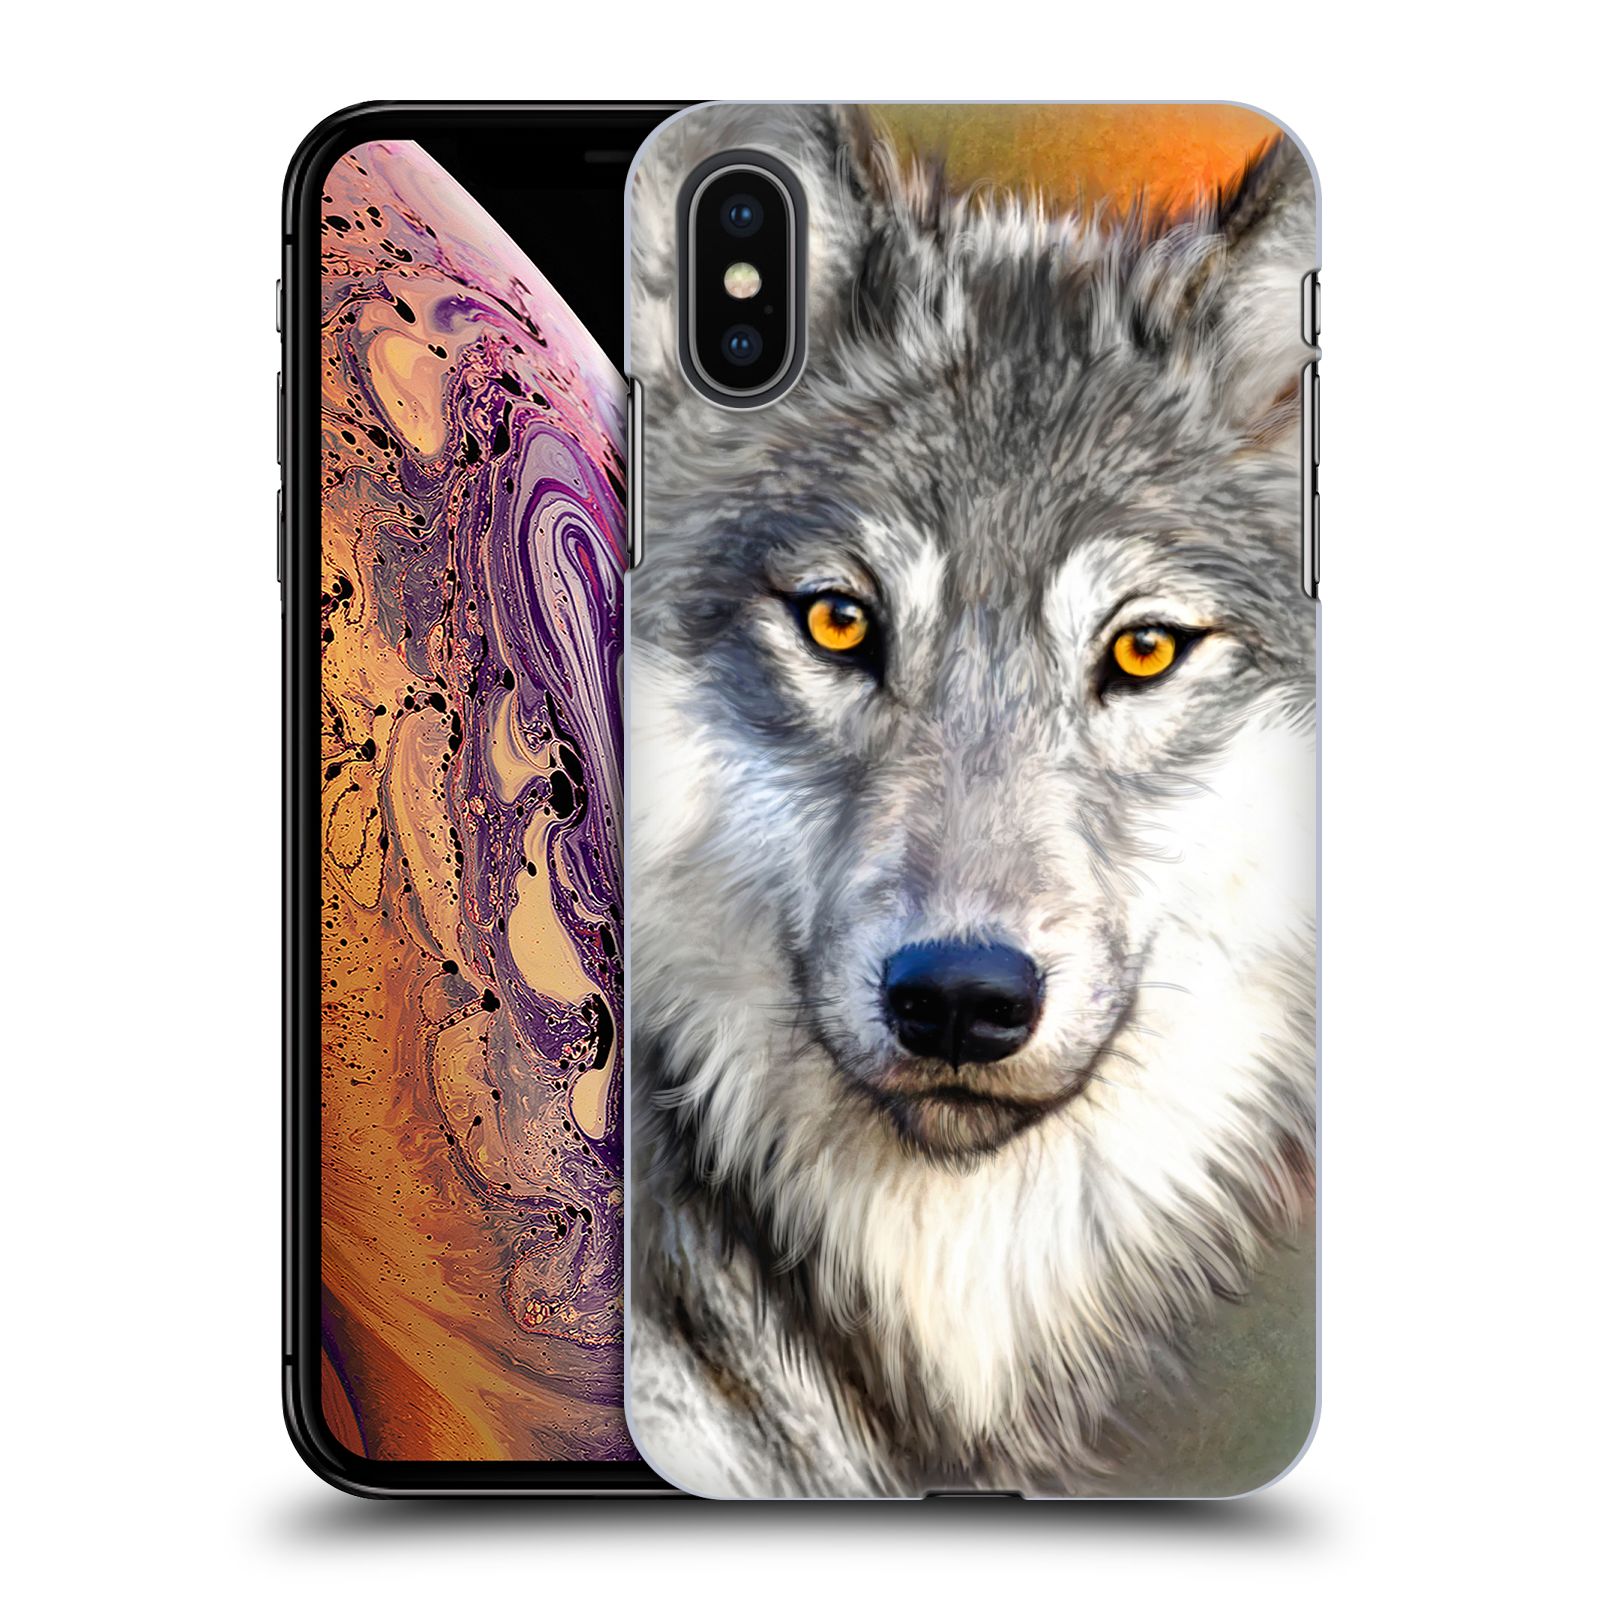 Zadní obal pro mobil Apple Iphone XS MAX - HEAD CASE - Aimee Stewart - Pohled Vlka